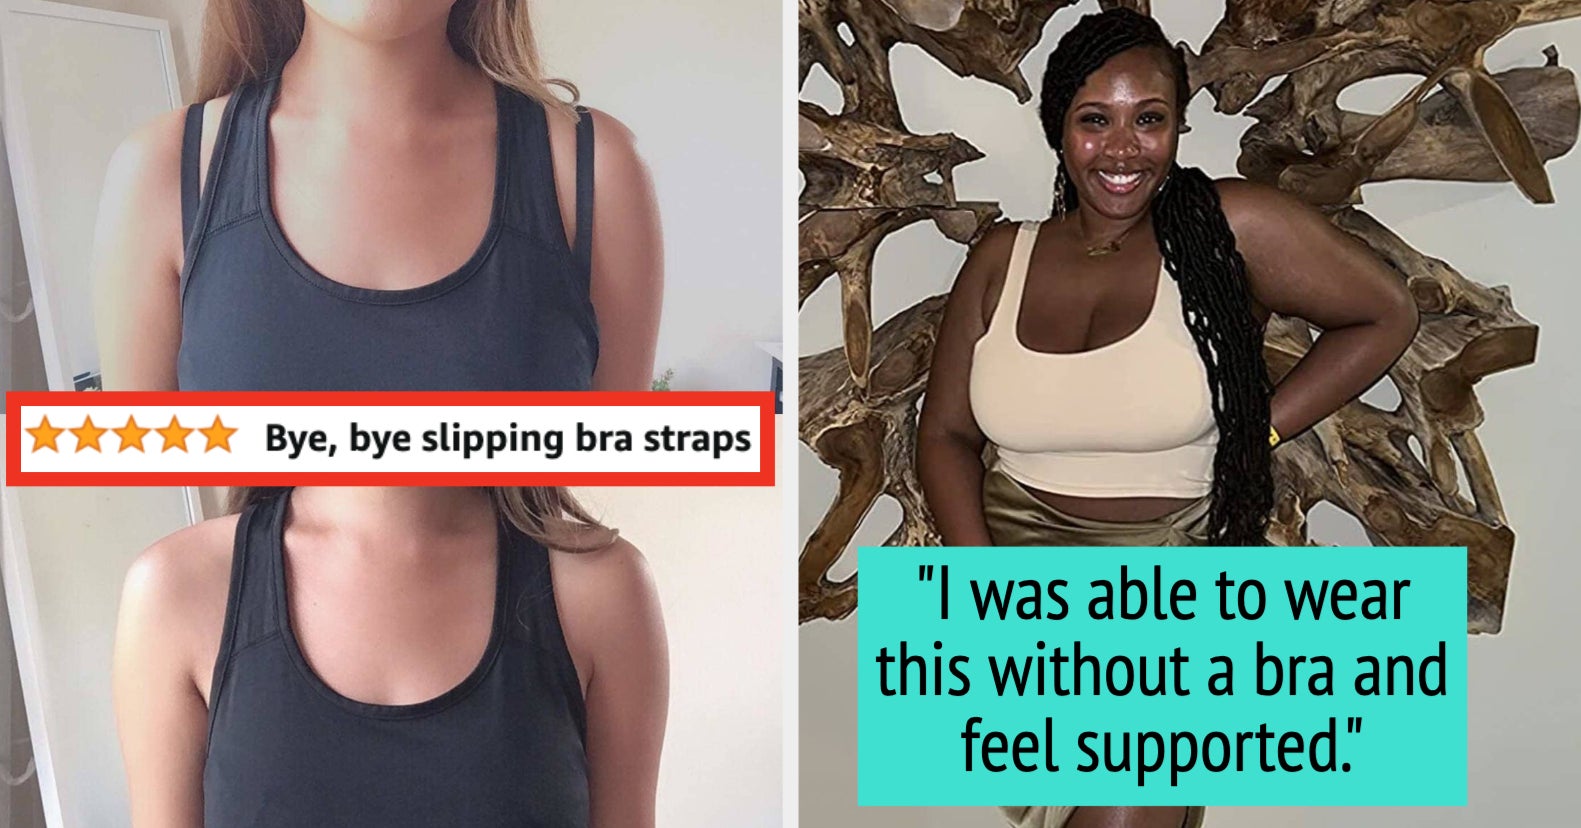 I'm a 34G and tried 's viral strapless bra - I was skeptical